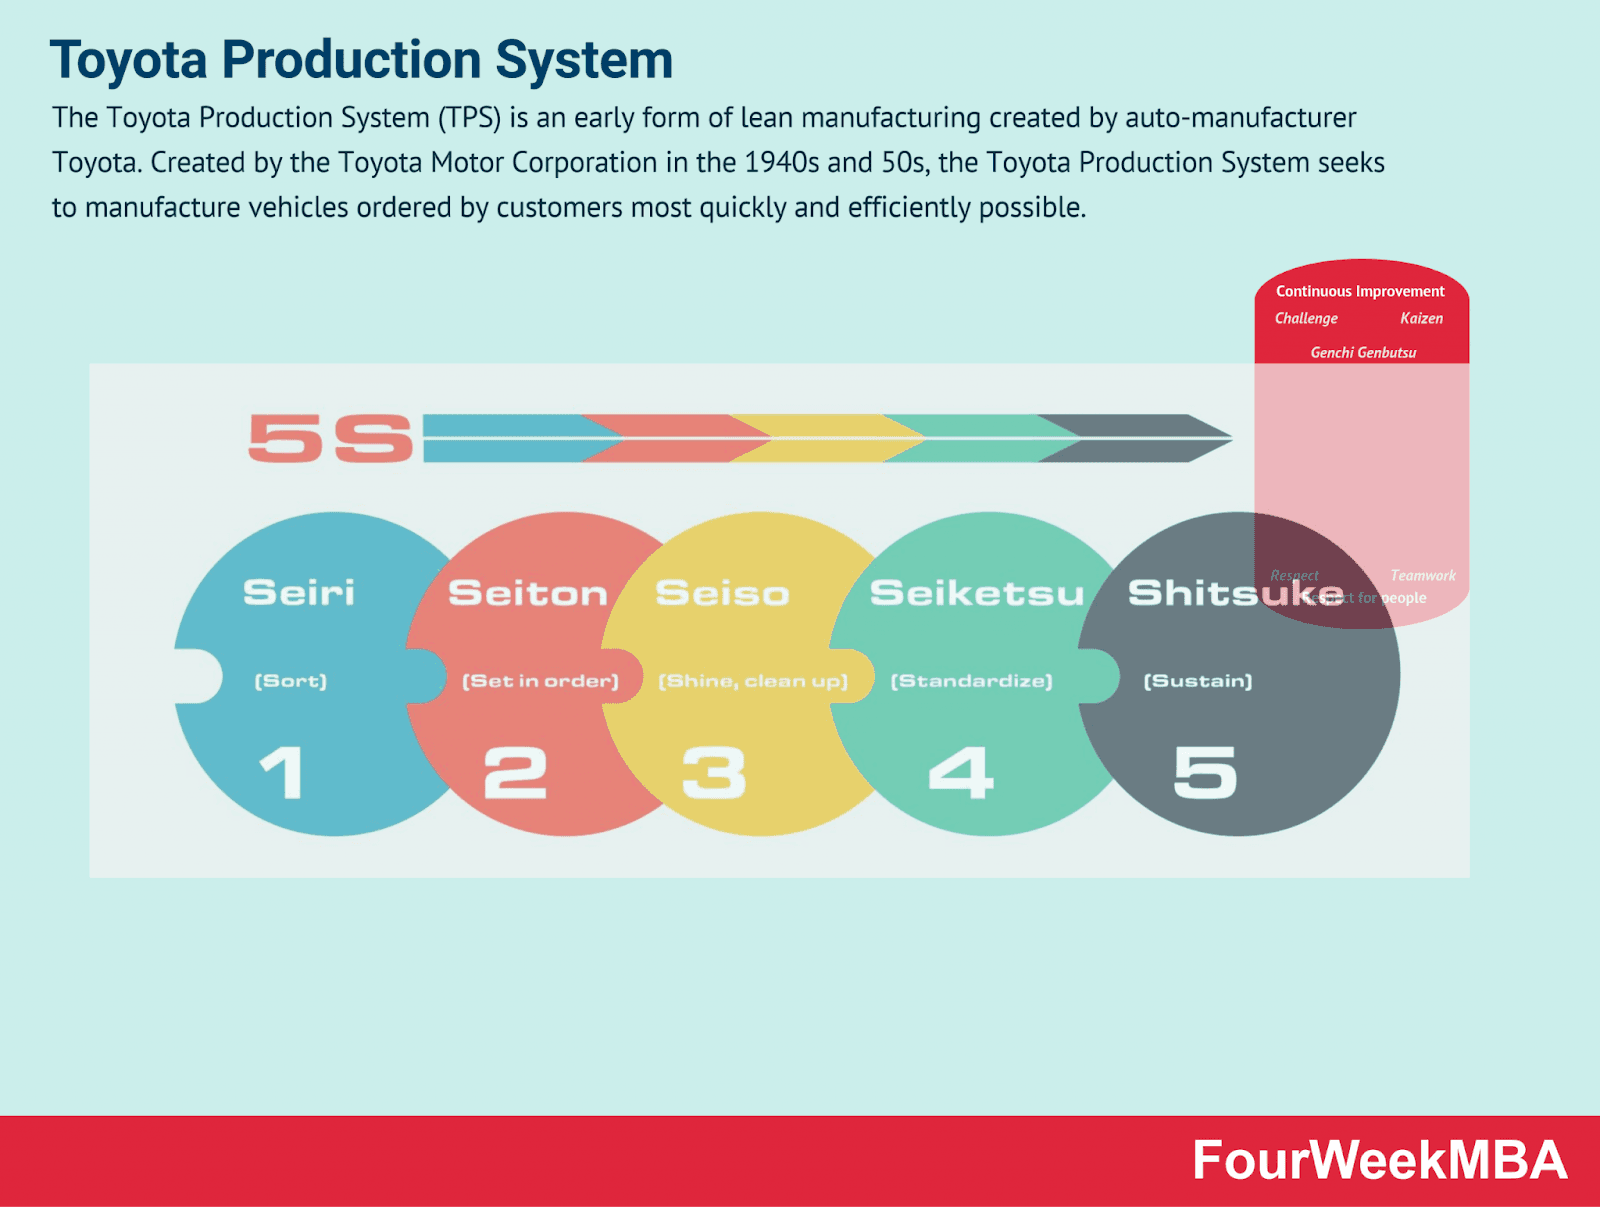 Toyota Production System for Product Marketing Strategies